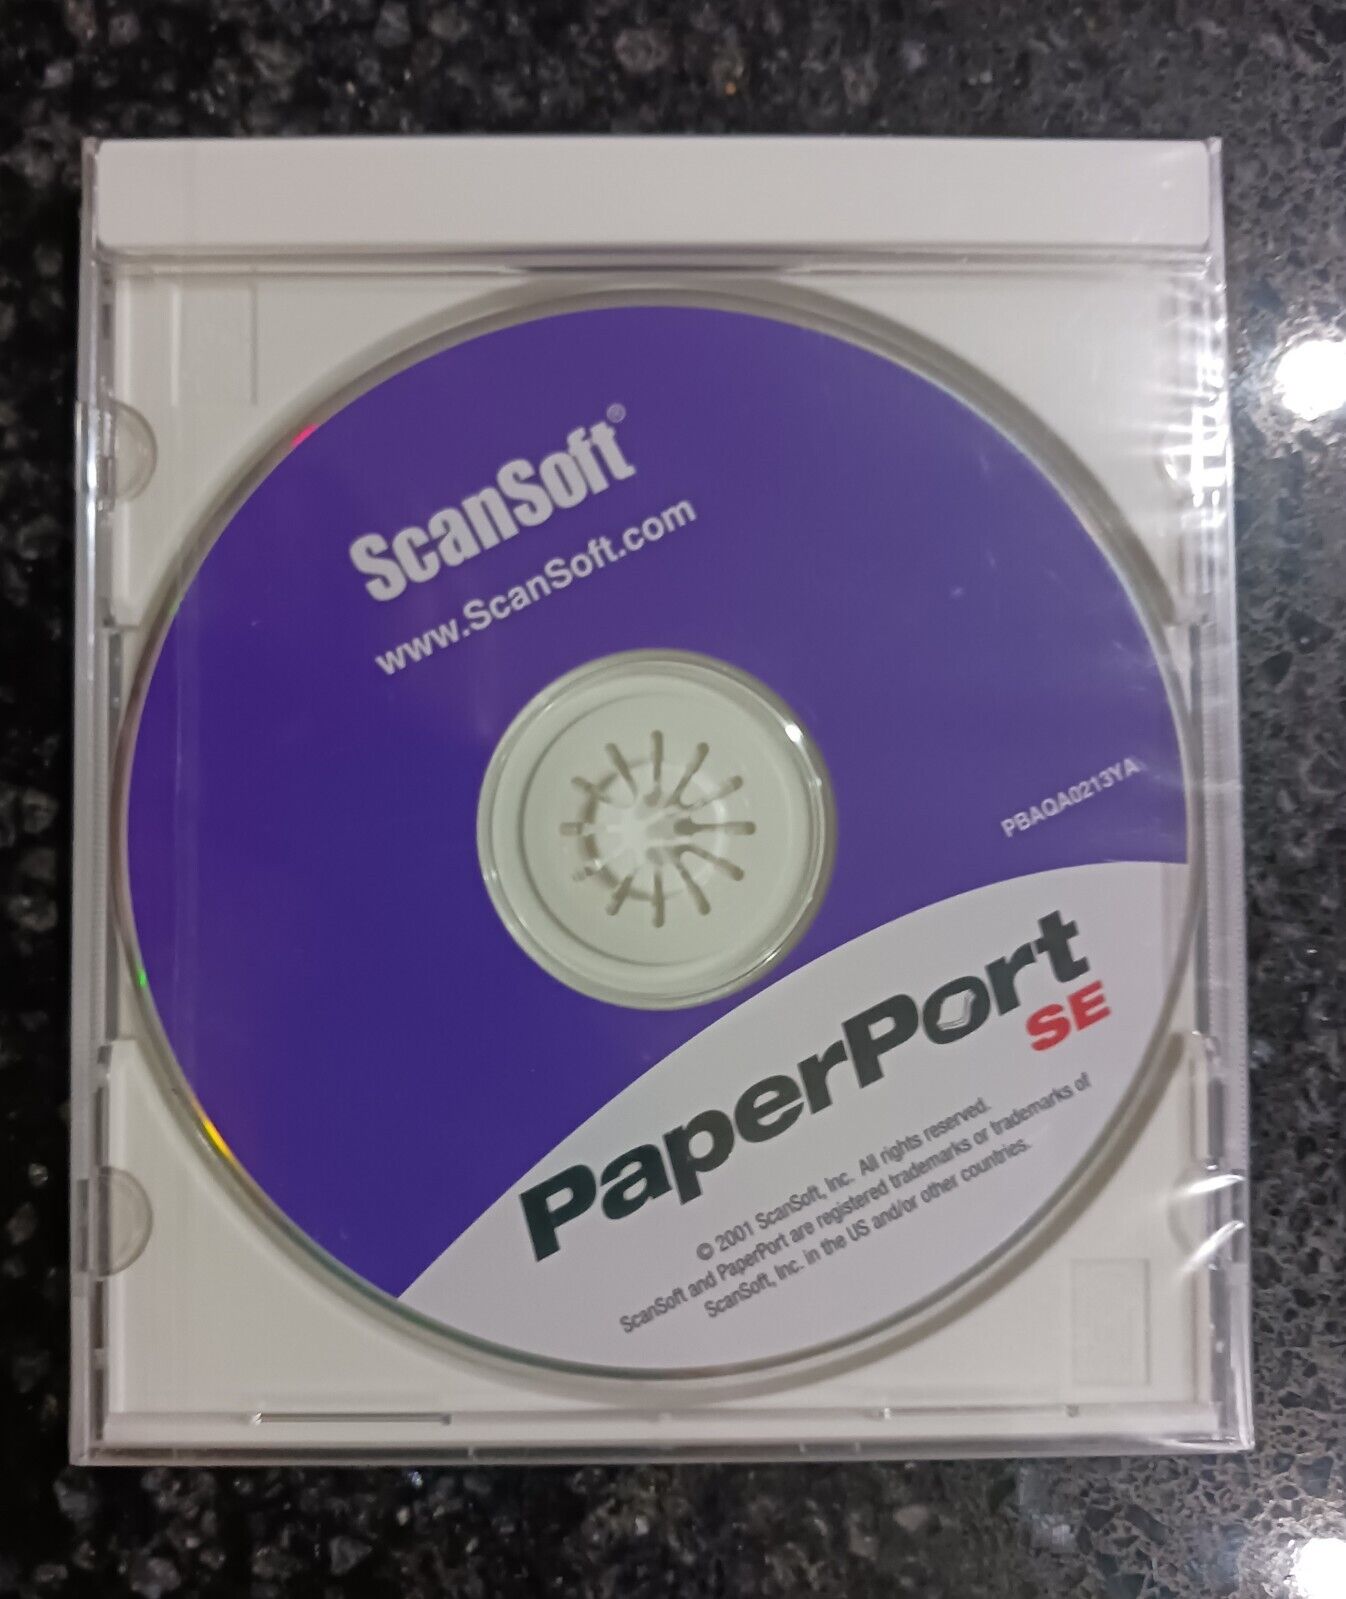 NEW SEALED ScanSoft Paperport SE Pc CD-Rom software